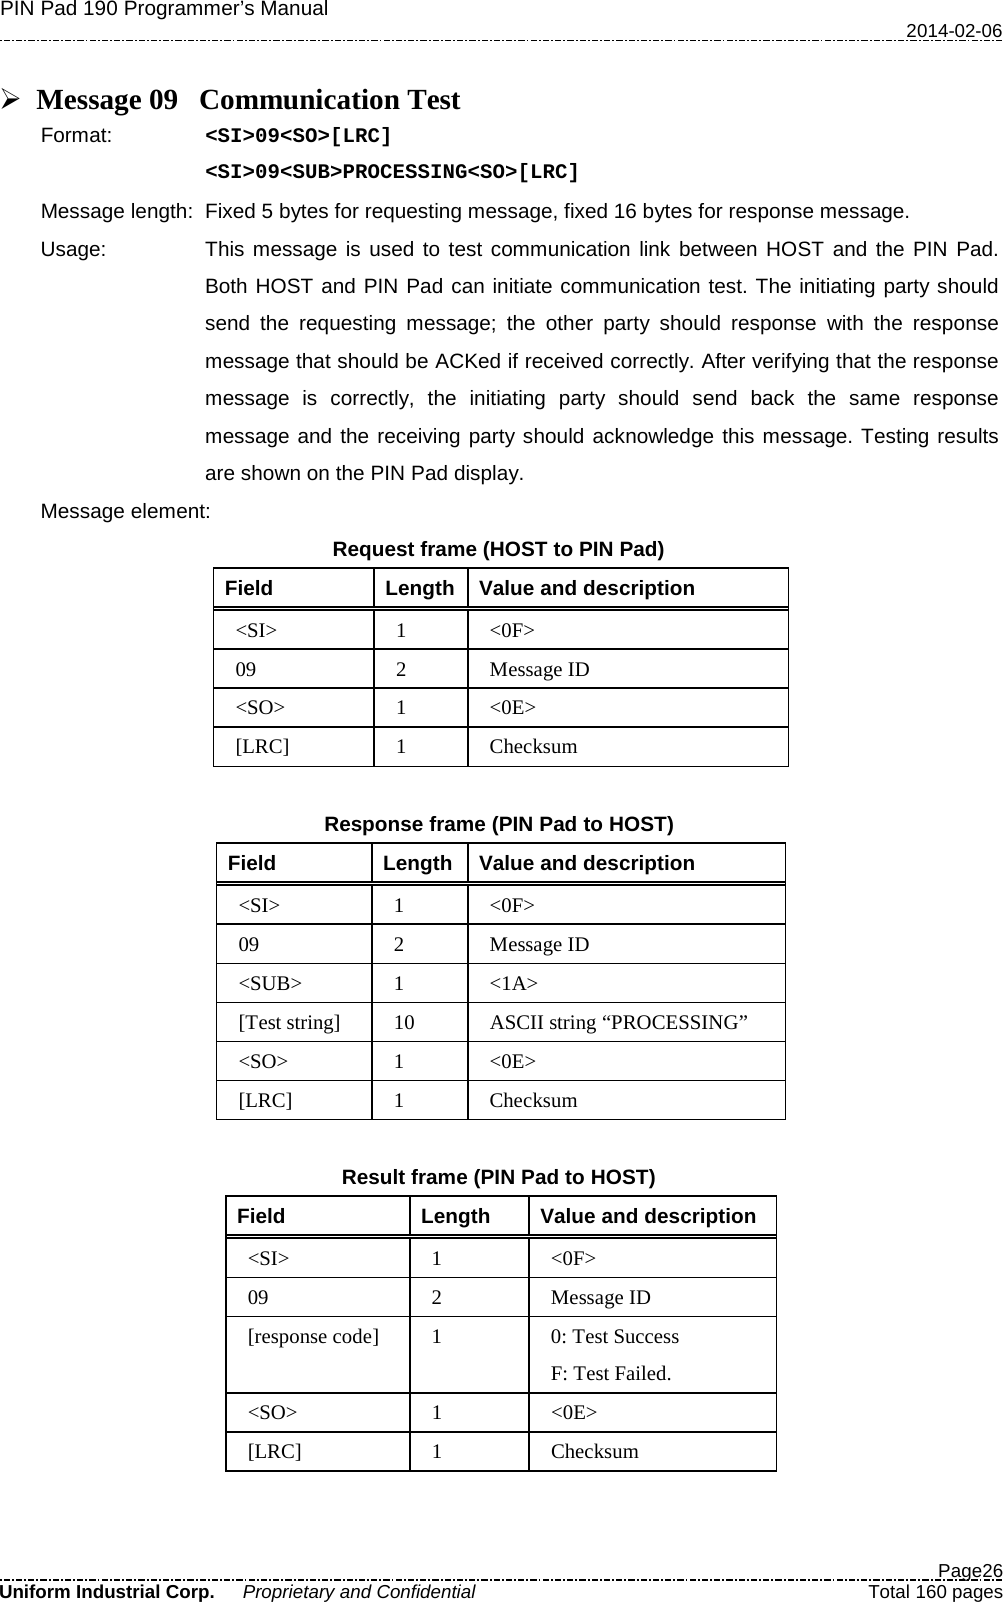 PIN Pad 190 Programmer’s Manual   2014-02-06  Page26 Uniform Industrial Corp. Proprietary and Confidential  Total 160 pages   Message 09 Communication Test Format:   &lt;SI&gt;09&lt;SO&gt;[LRC] &lt;SI&gt;09&lt;SUB&gt;PROCESSING&lt;SO&gt;[LRC] Message length: Fixed 5 bytes for requesting message, fixed 16 bytes for response message. Usage: This message is used to test communication link between HOST and the PIN Pad. Both HOST and PIN Pad can initiate communication test. The initiating party should send the requesting message; the other party should response with the response message that should be ACKed if received correctly. After verifying that the response message is correctly, the initiating party should send back the same response message and the receiving party should acknowledge this message. Testing results are shown on the PIN Pad display. Message element:   Request frame (HOST to PIN Pad) Field  Length  Value and description &lt;SI&gt;  1  &lt;0F&gt; 09  2  Message ID &lt;SO&gt;  1  &lt;0E&gt; [LRC]  1  Checksum  Response frame (PIN Pad to HOST) Field  Length  Value and description &lt;SI&gt;  1  &lt;0F&gt; 09  2  Message ID &lt;SUB&gt;  1  &lt;1A&gt; [Test string] 10 ASCII string “PROCESSING” &lt;SO&gt;  1  &lt;0E&gt; [LRC]  1  Checksum  Result frame (PIN Pad to HOST) Field  Length  Value and description &lt;SI&gt;  1  &lt;0F&gt; 09  2  Message ID [response code]  1  0: Test Success F: Test Failed. &lt;SO&gt;  1  &lt;0E&gt; [LRC]  1  Checksum   